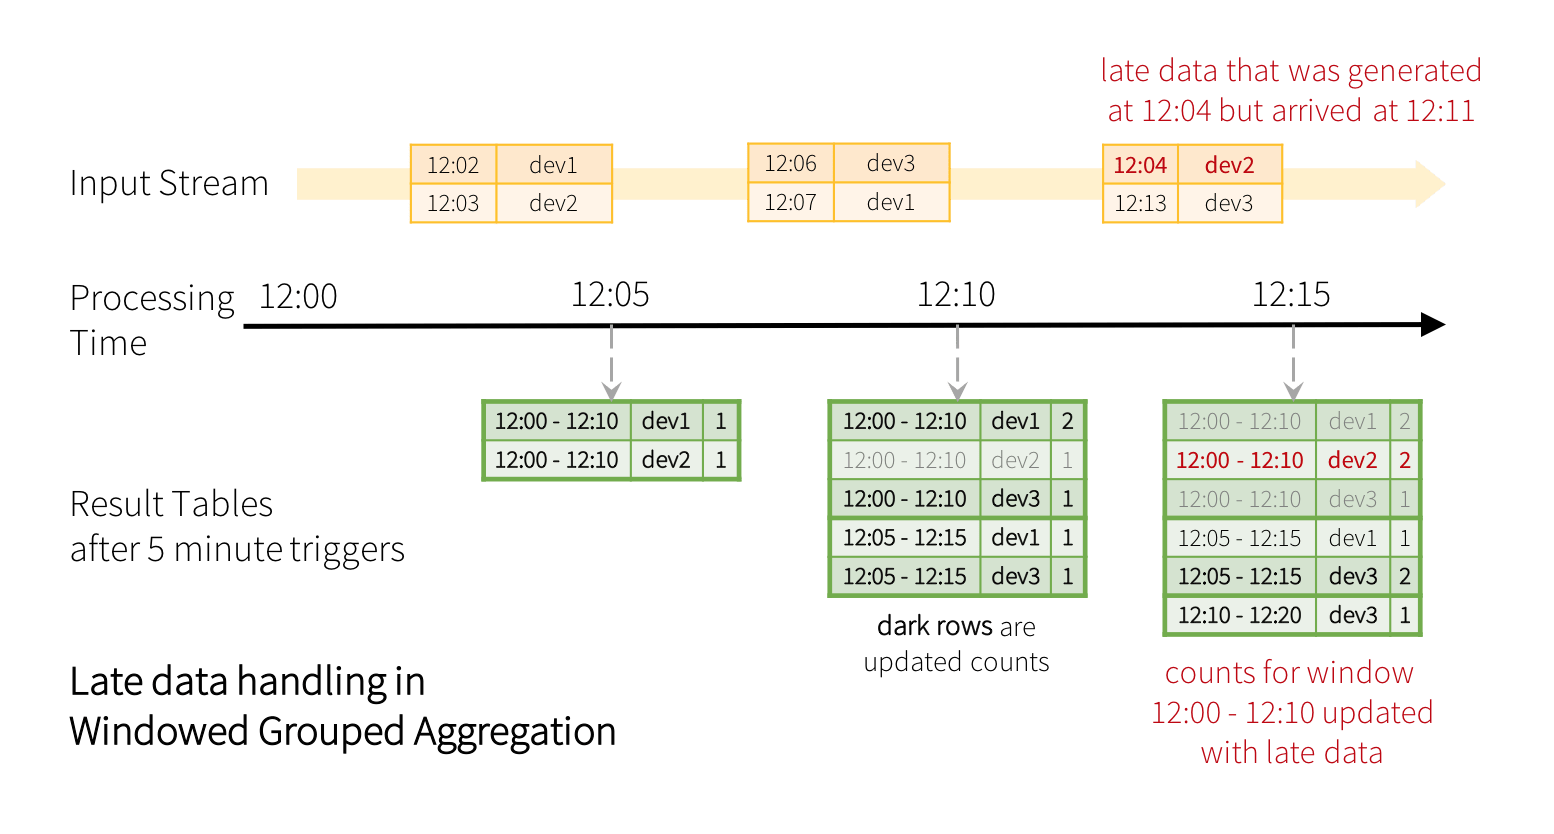 Late data handling in Windowed Grouped Aggregation